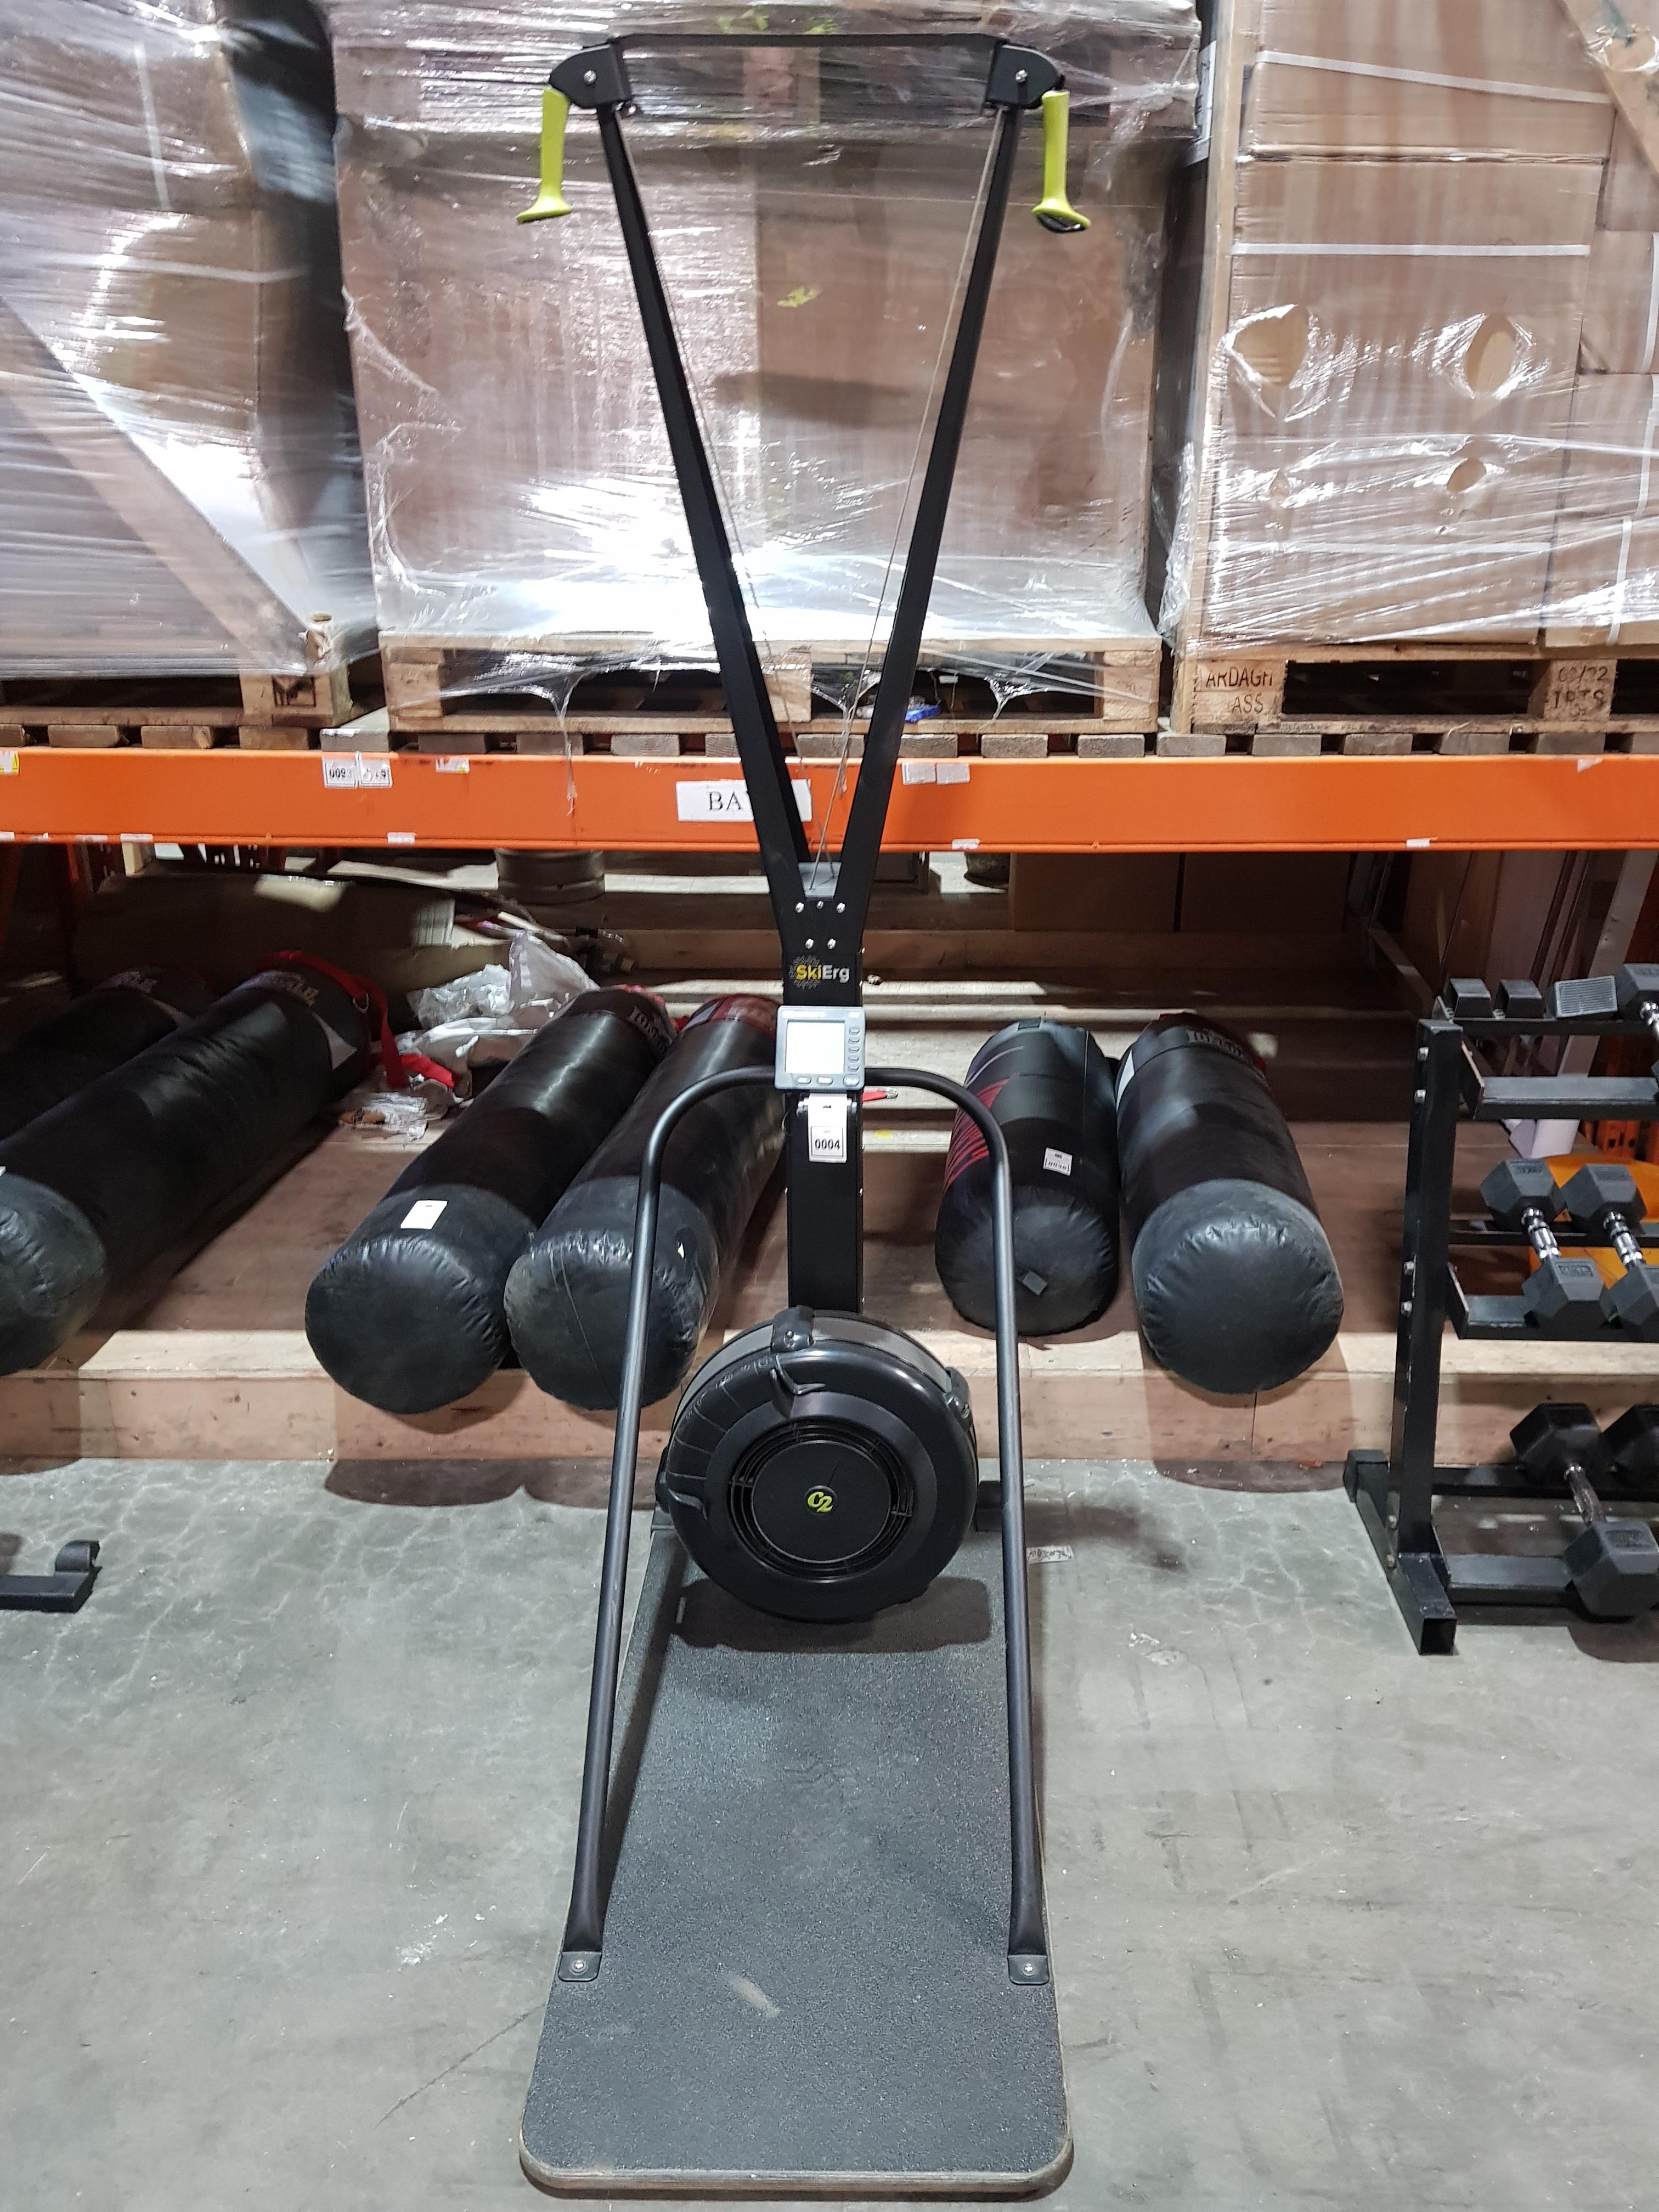 1 X CONCEPT 2 SKI ERG - FREESTANDING WITH BASE - PM5 PERFORMANCE MONITOR - PLYWHEEL AND DAMPNER